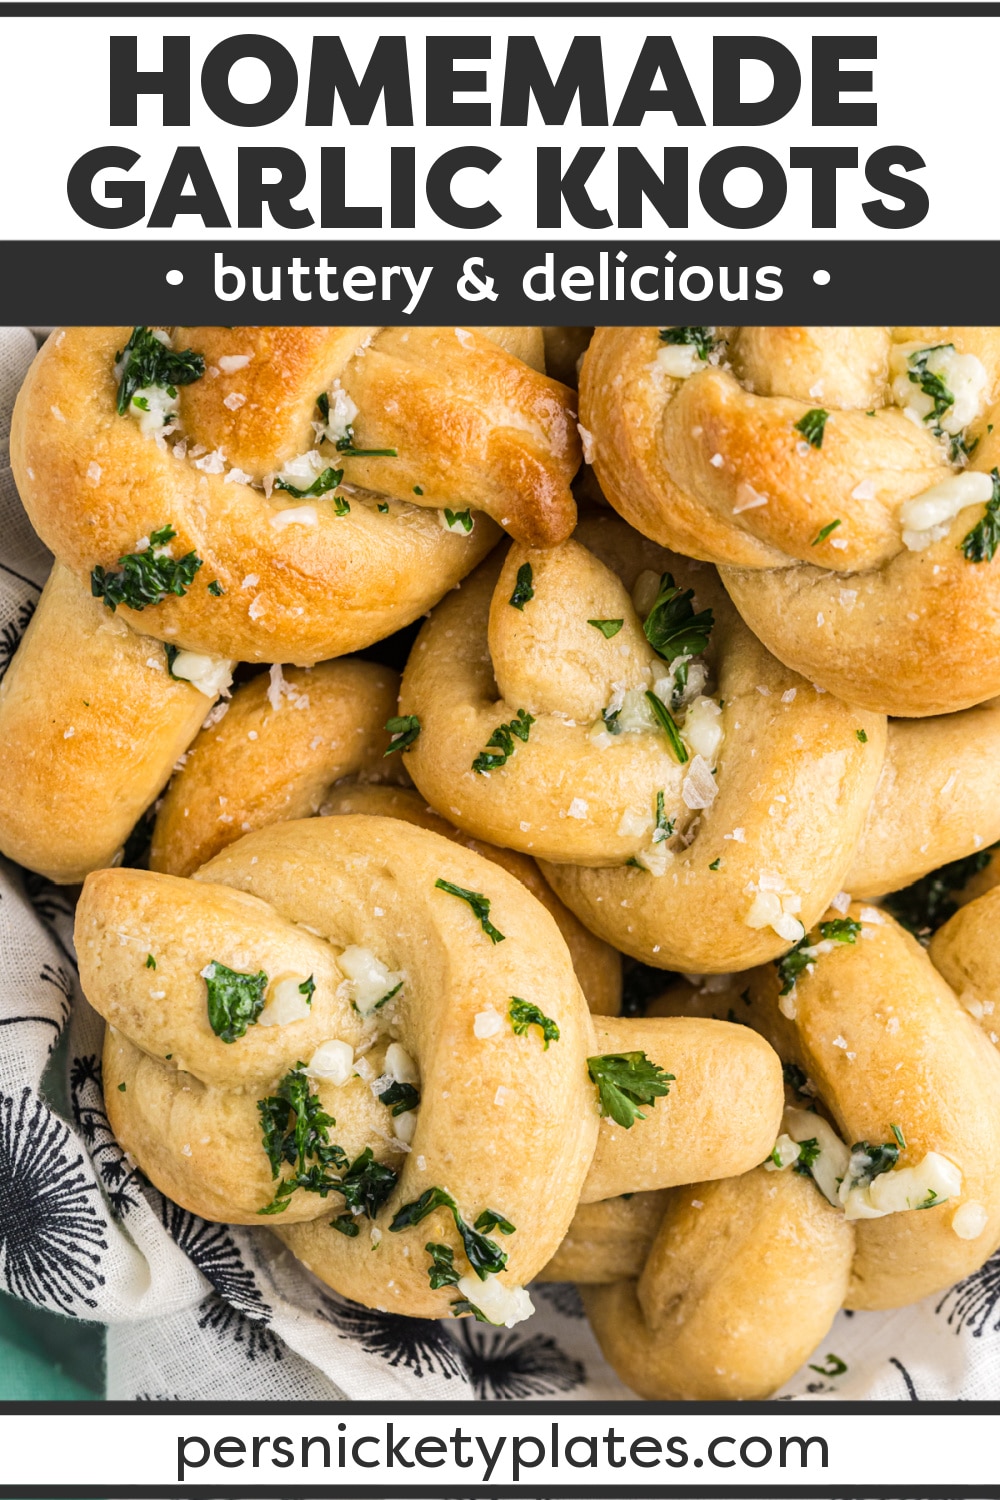 Easy Garlic Knots are homemade but simple to make. Topped with garlic butter and parmesan cheese, these buttery rolls are perfect alongside dinner or with sauce for dipping. | www.persnicketyplates.com